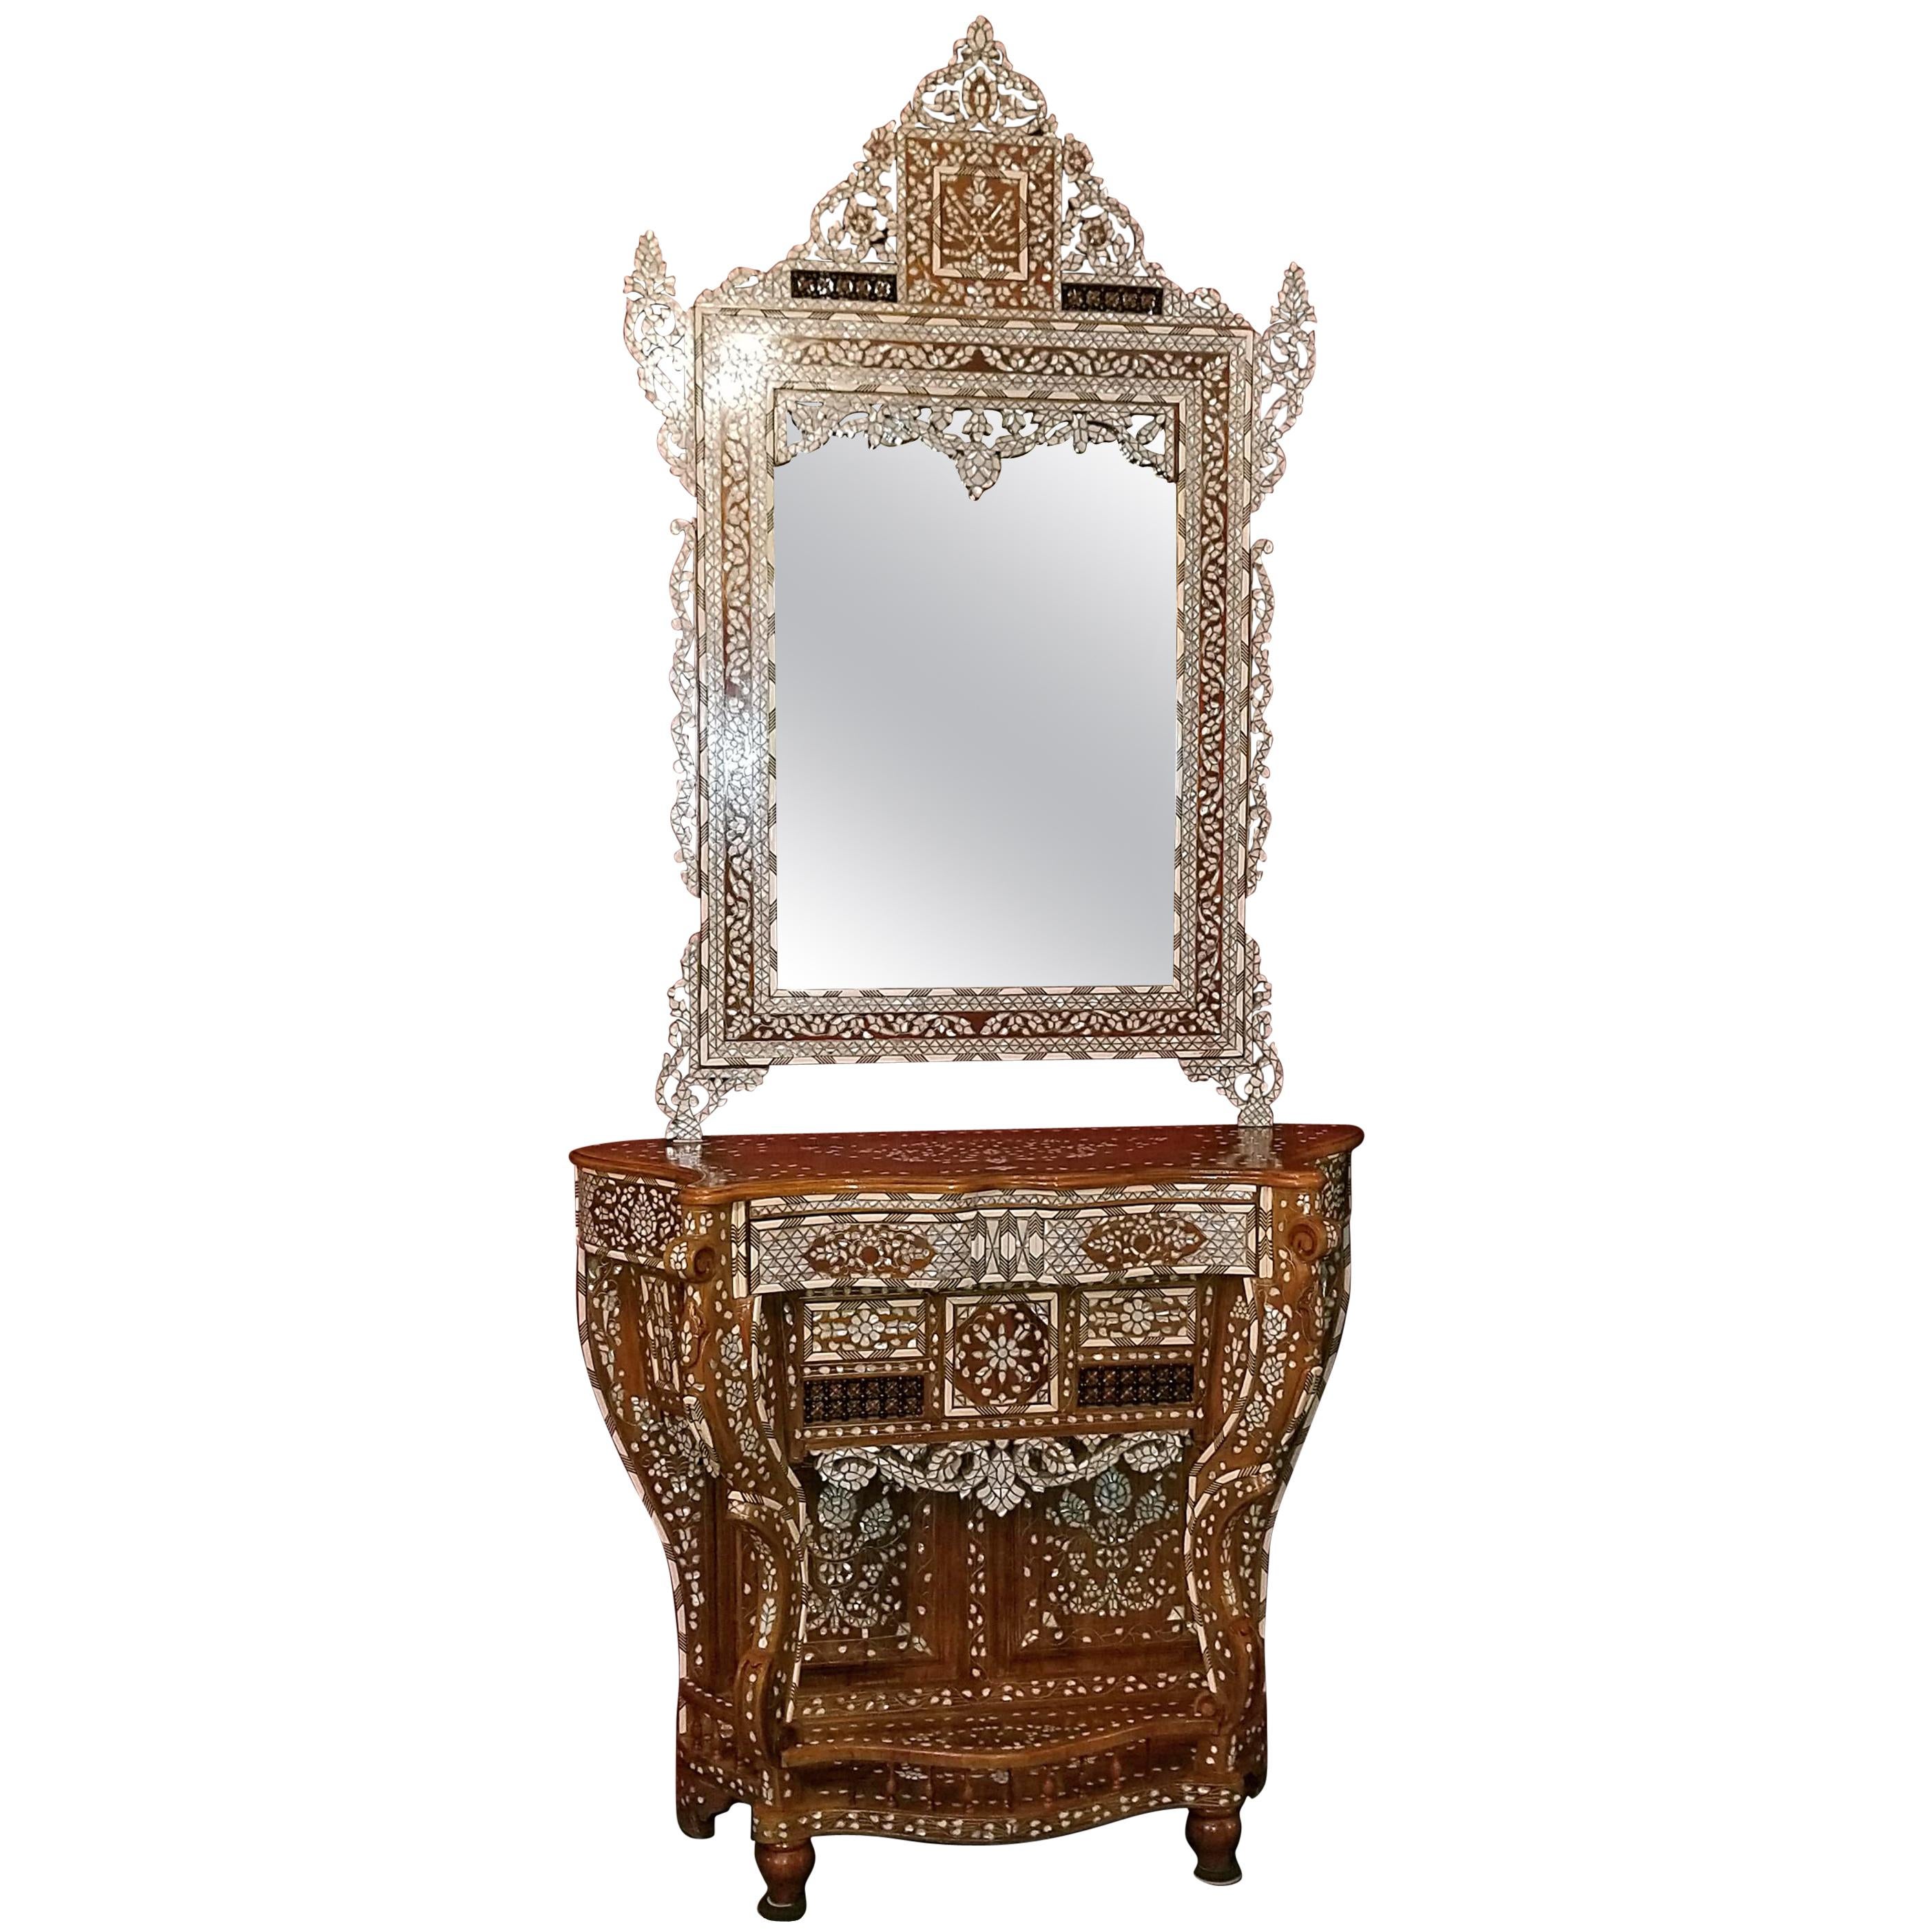 Moroccan Bone and Mother of Pearl Inlaid Console Table and Mirror